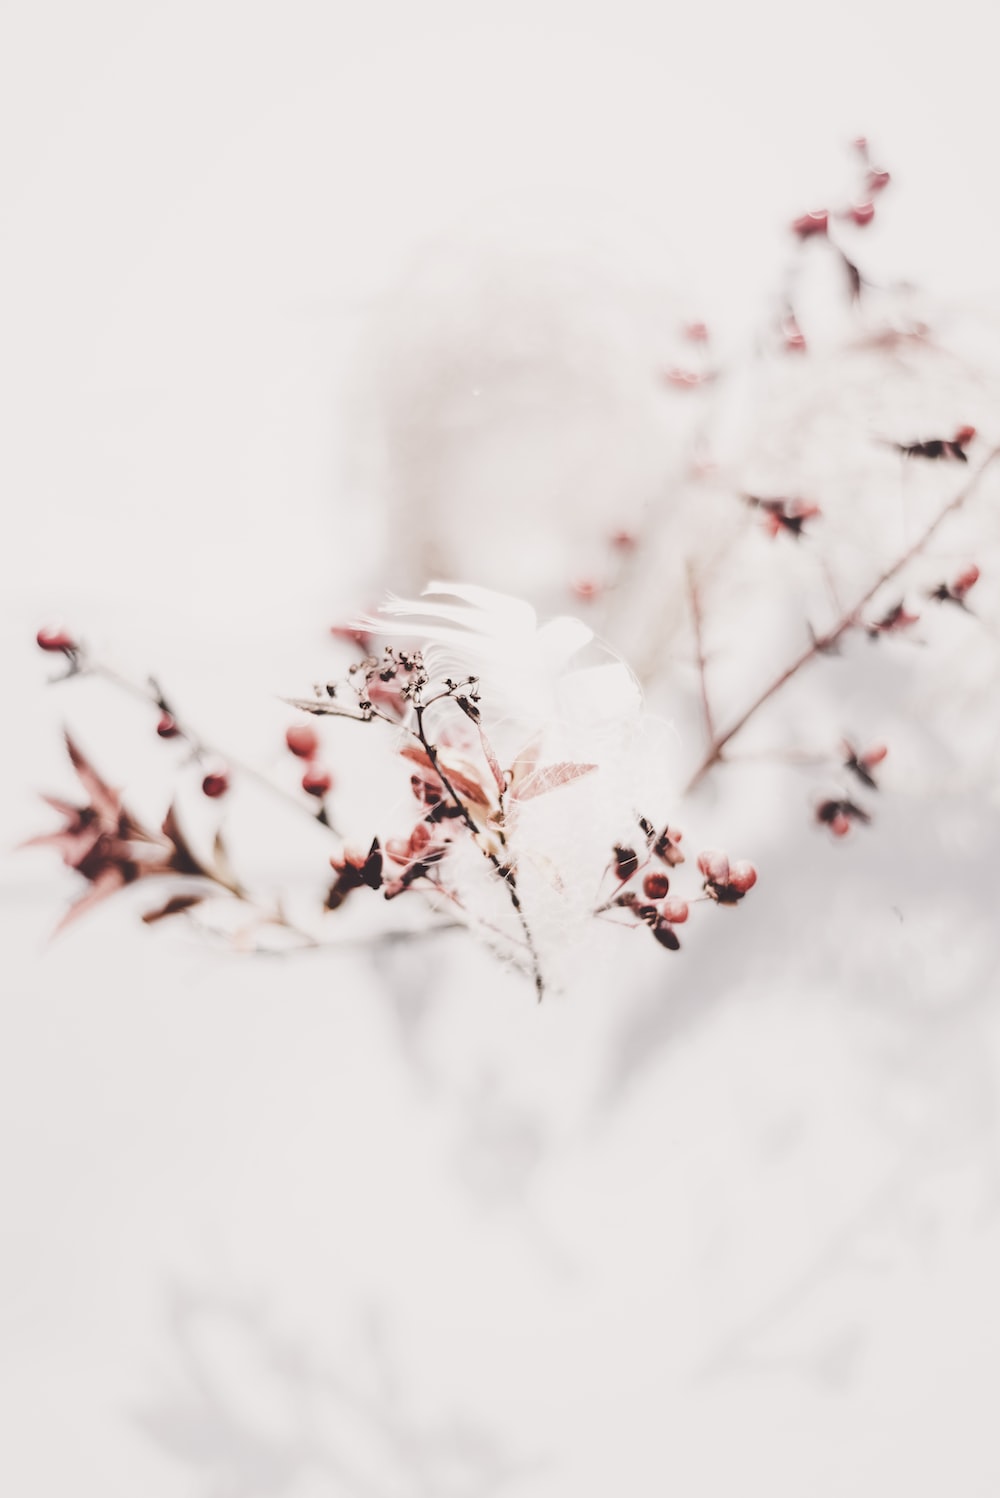 Winter Flowers Picture. Download Free Image